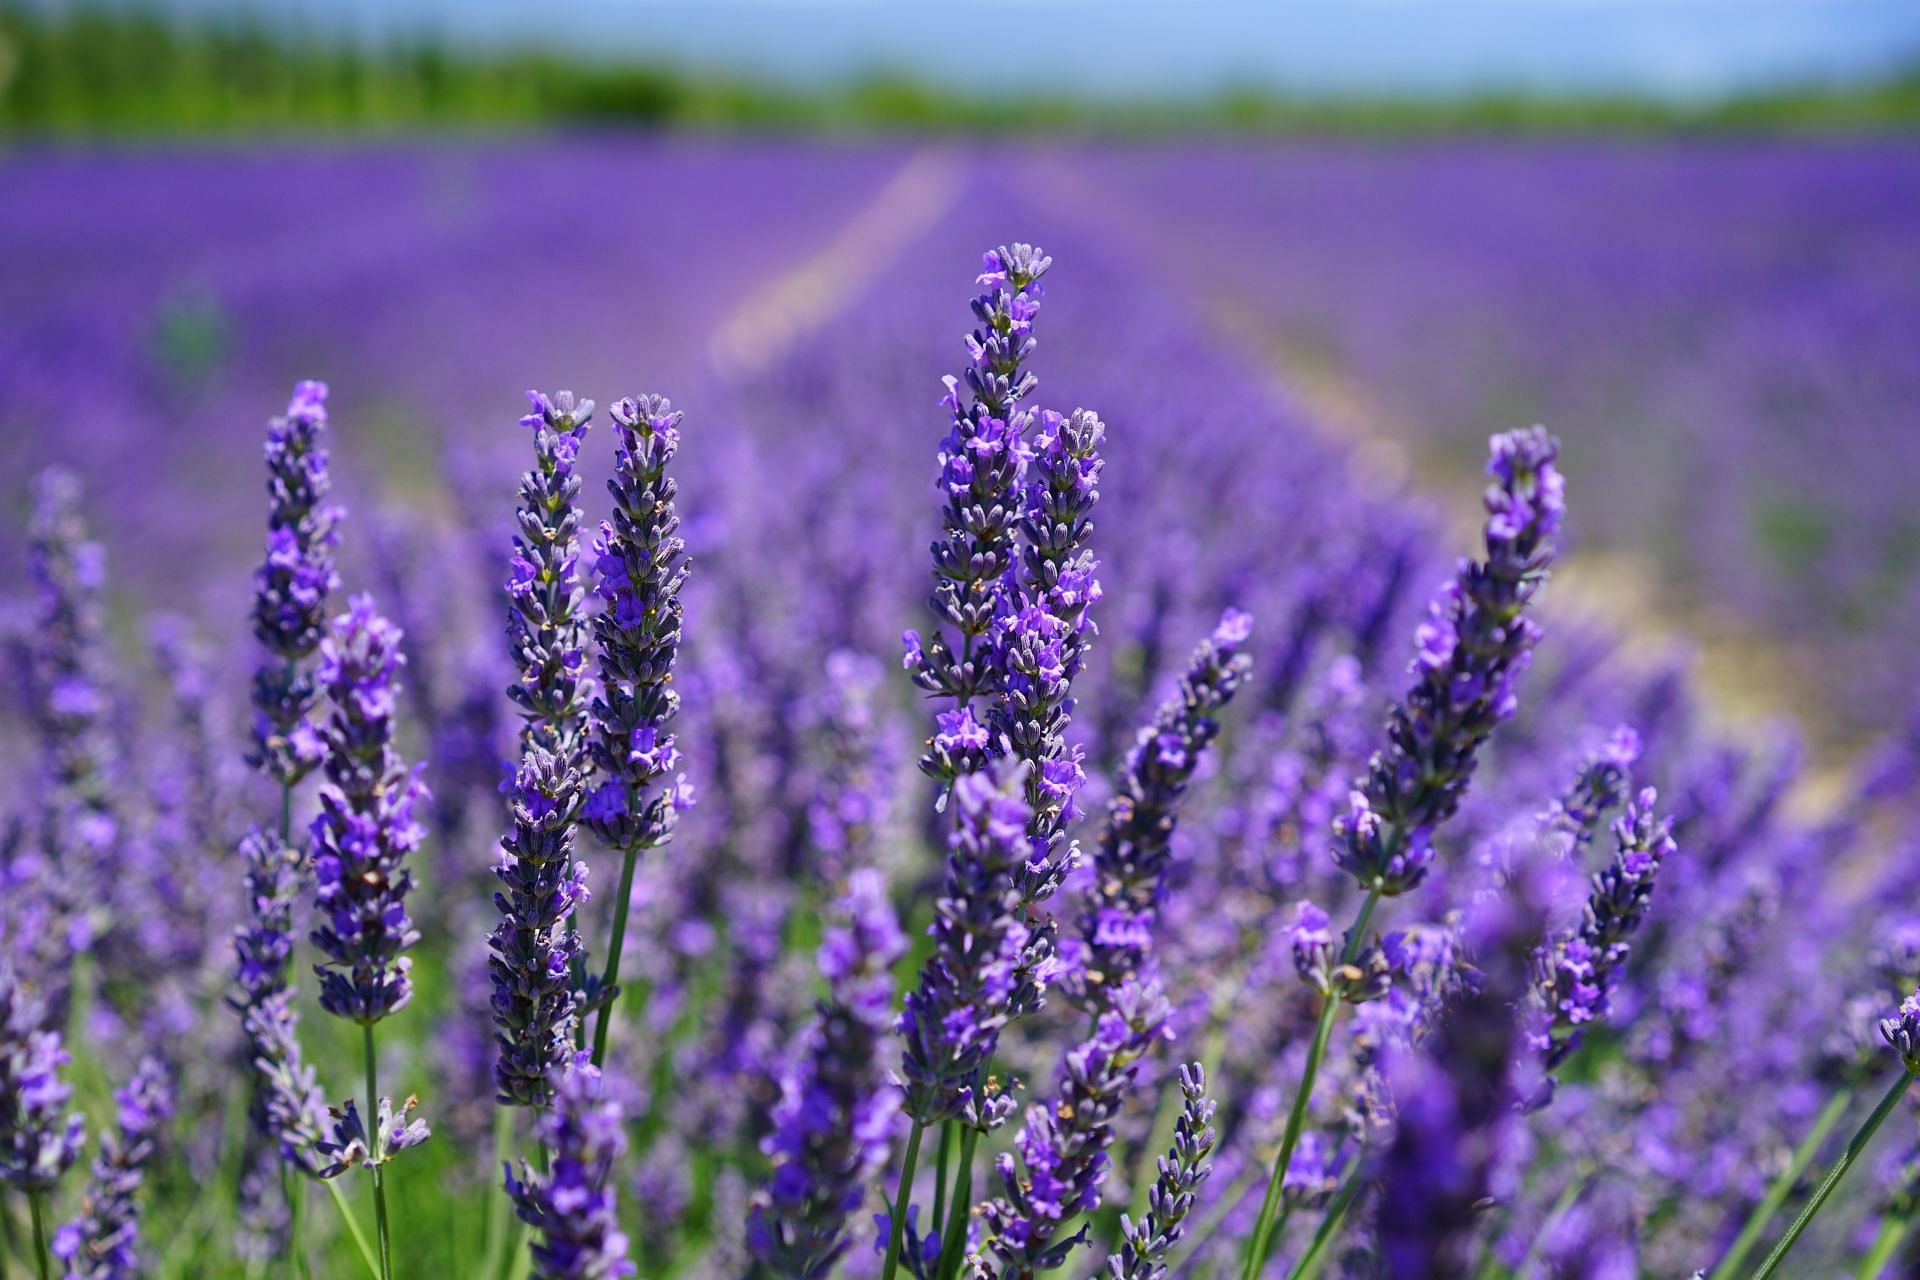 Lavender is one of the best essential oils to promote relaxation and calm. (Image via Pexels/Pixabay)